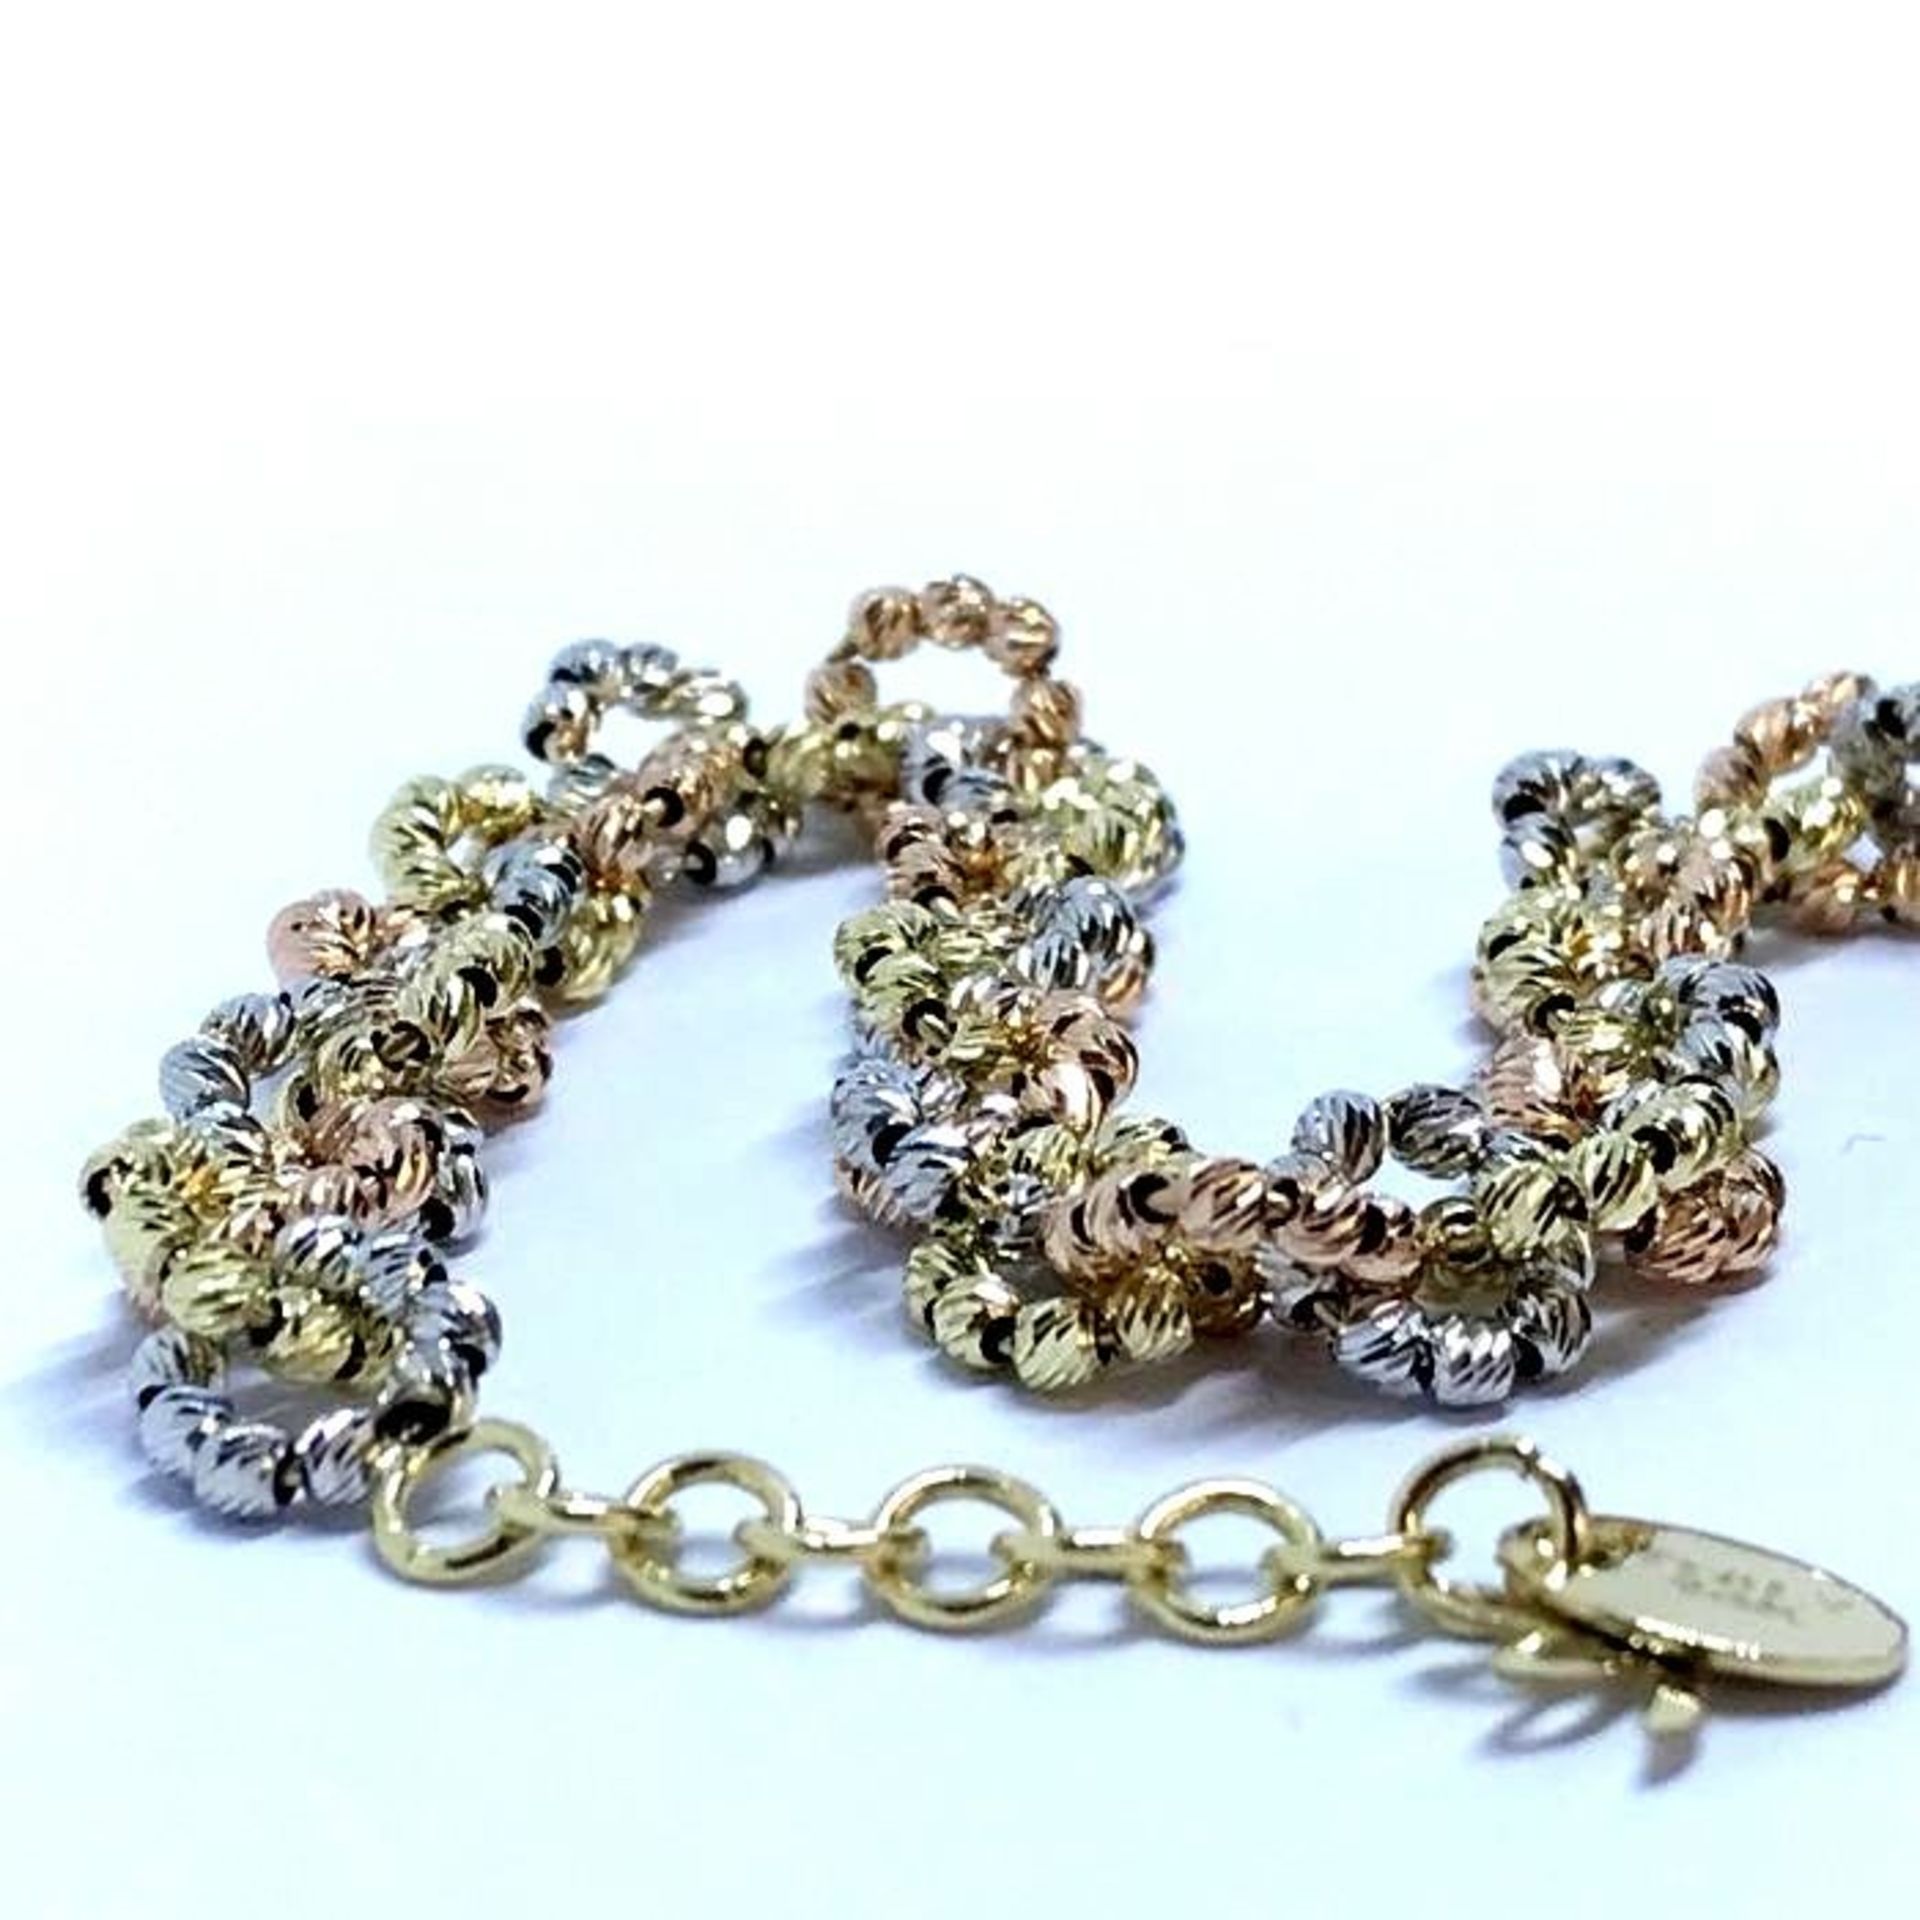 Italian Dorica Beads Bracelet In 14K Tri Colour White Yellow and Rosegold. 8.3 In (21 cm) - Image 3 of 6